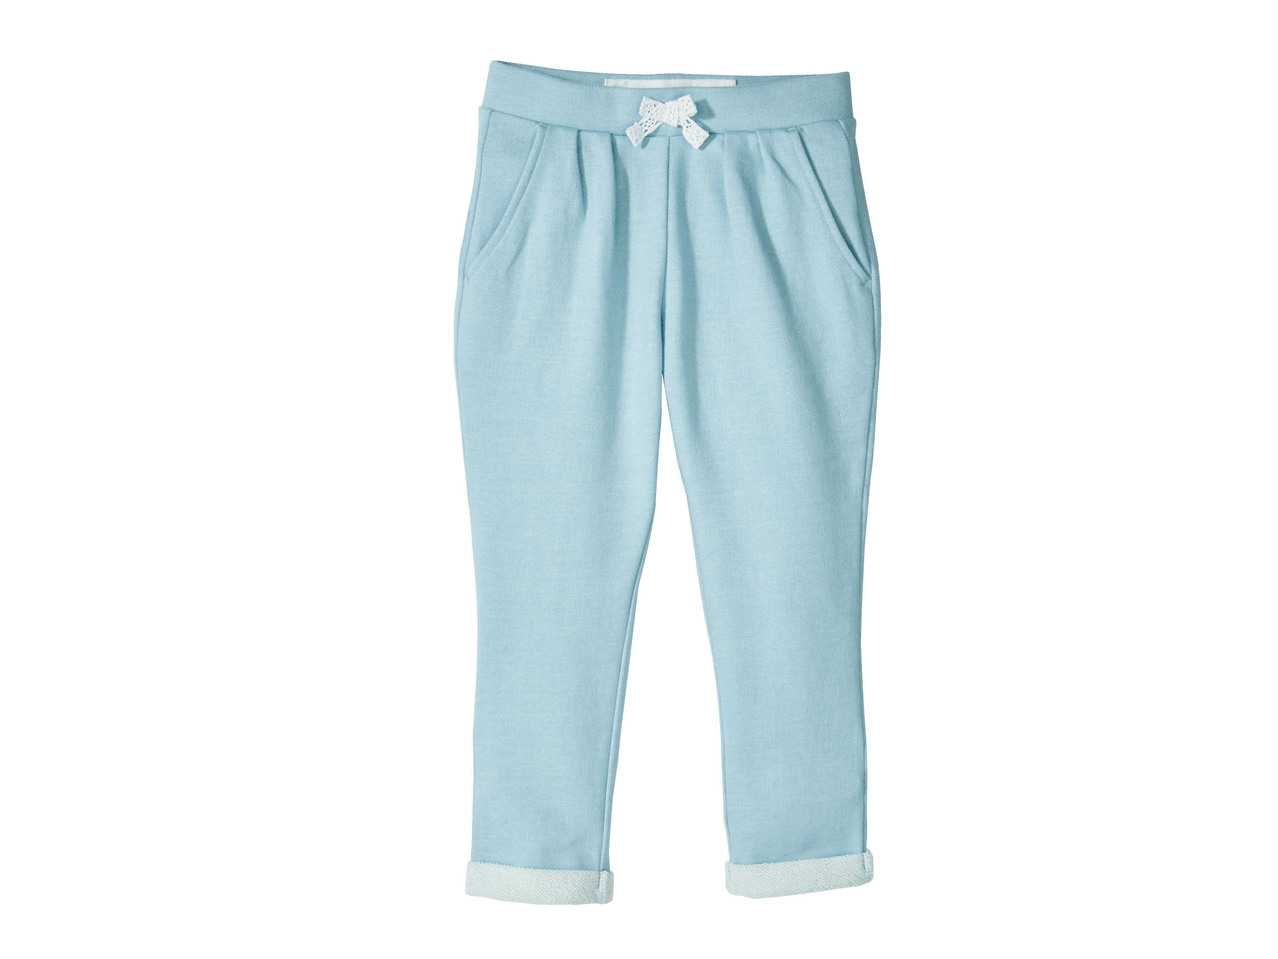 Girls' Sports Trousers